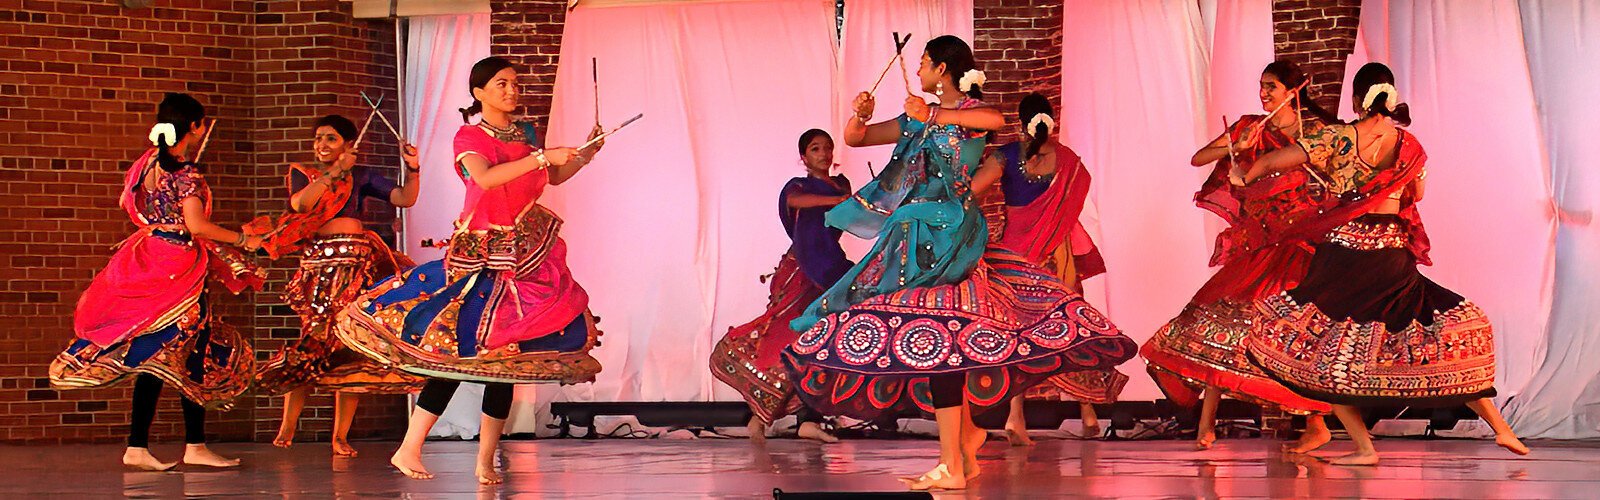 The Rudram Dance Company (Indian classical dance) takes to the stage to perform “RASS," a socio-religious folk dance originating from the Indian state of Gujarat.